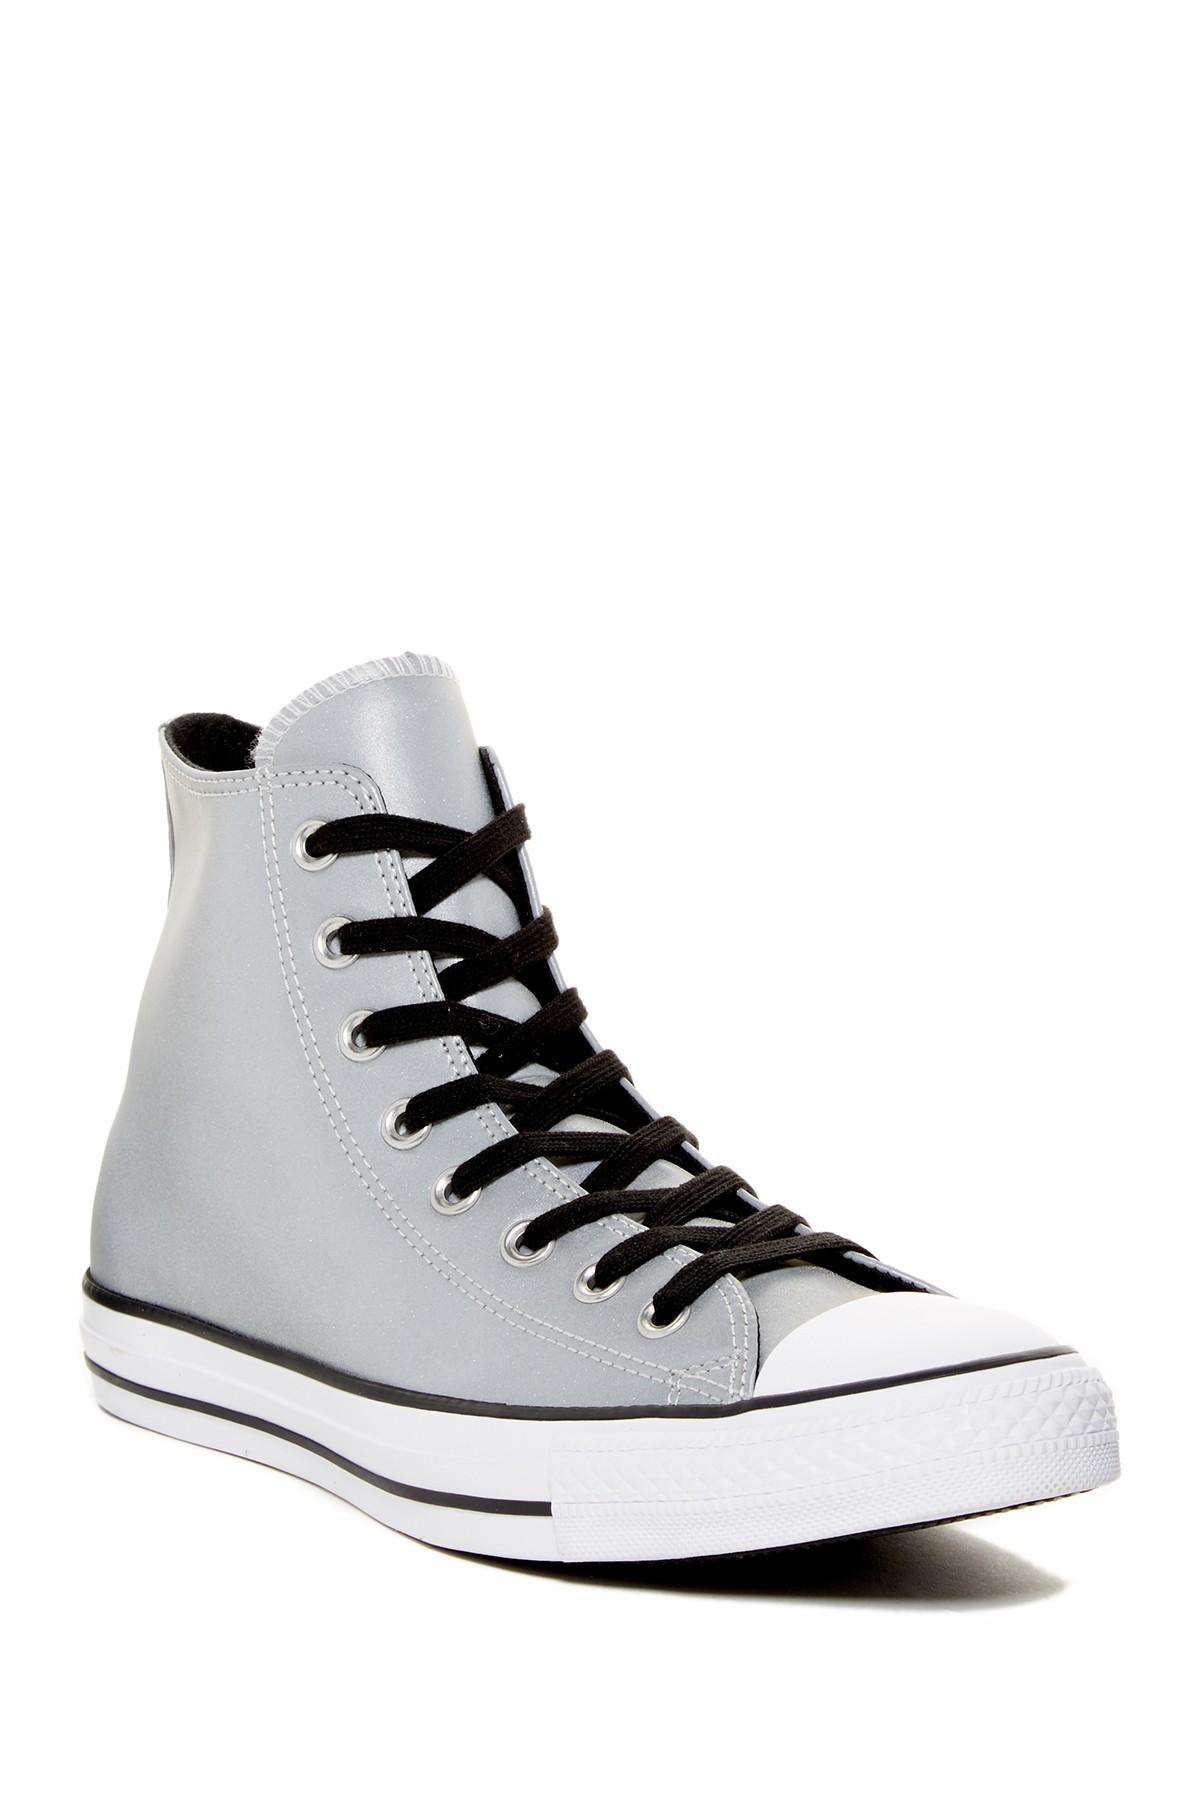 Converse Chuck Taylor All Star Reflective High Top Sneaker (unisex) in Black  | Lyst